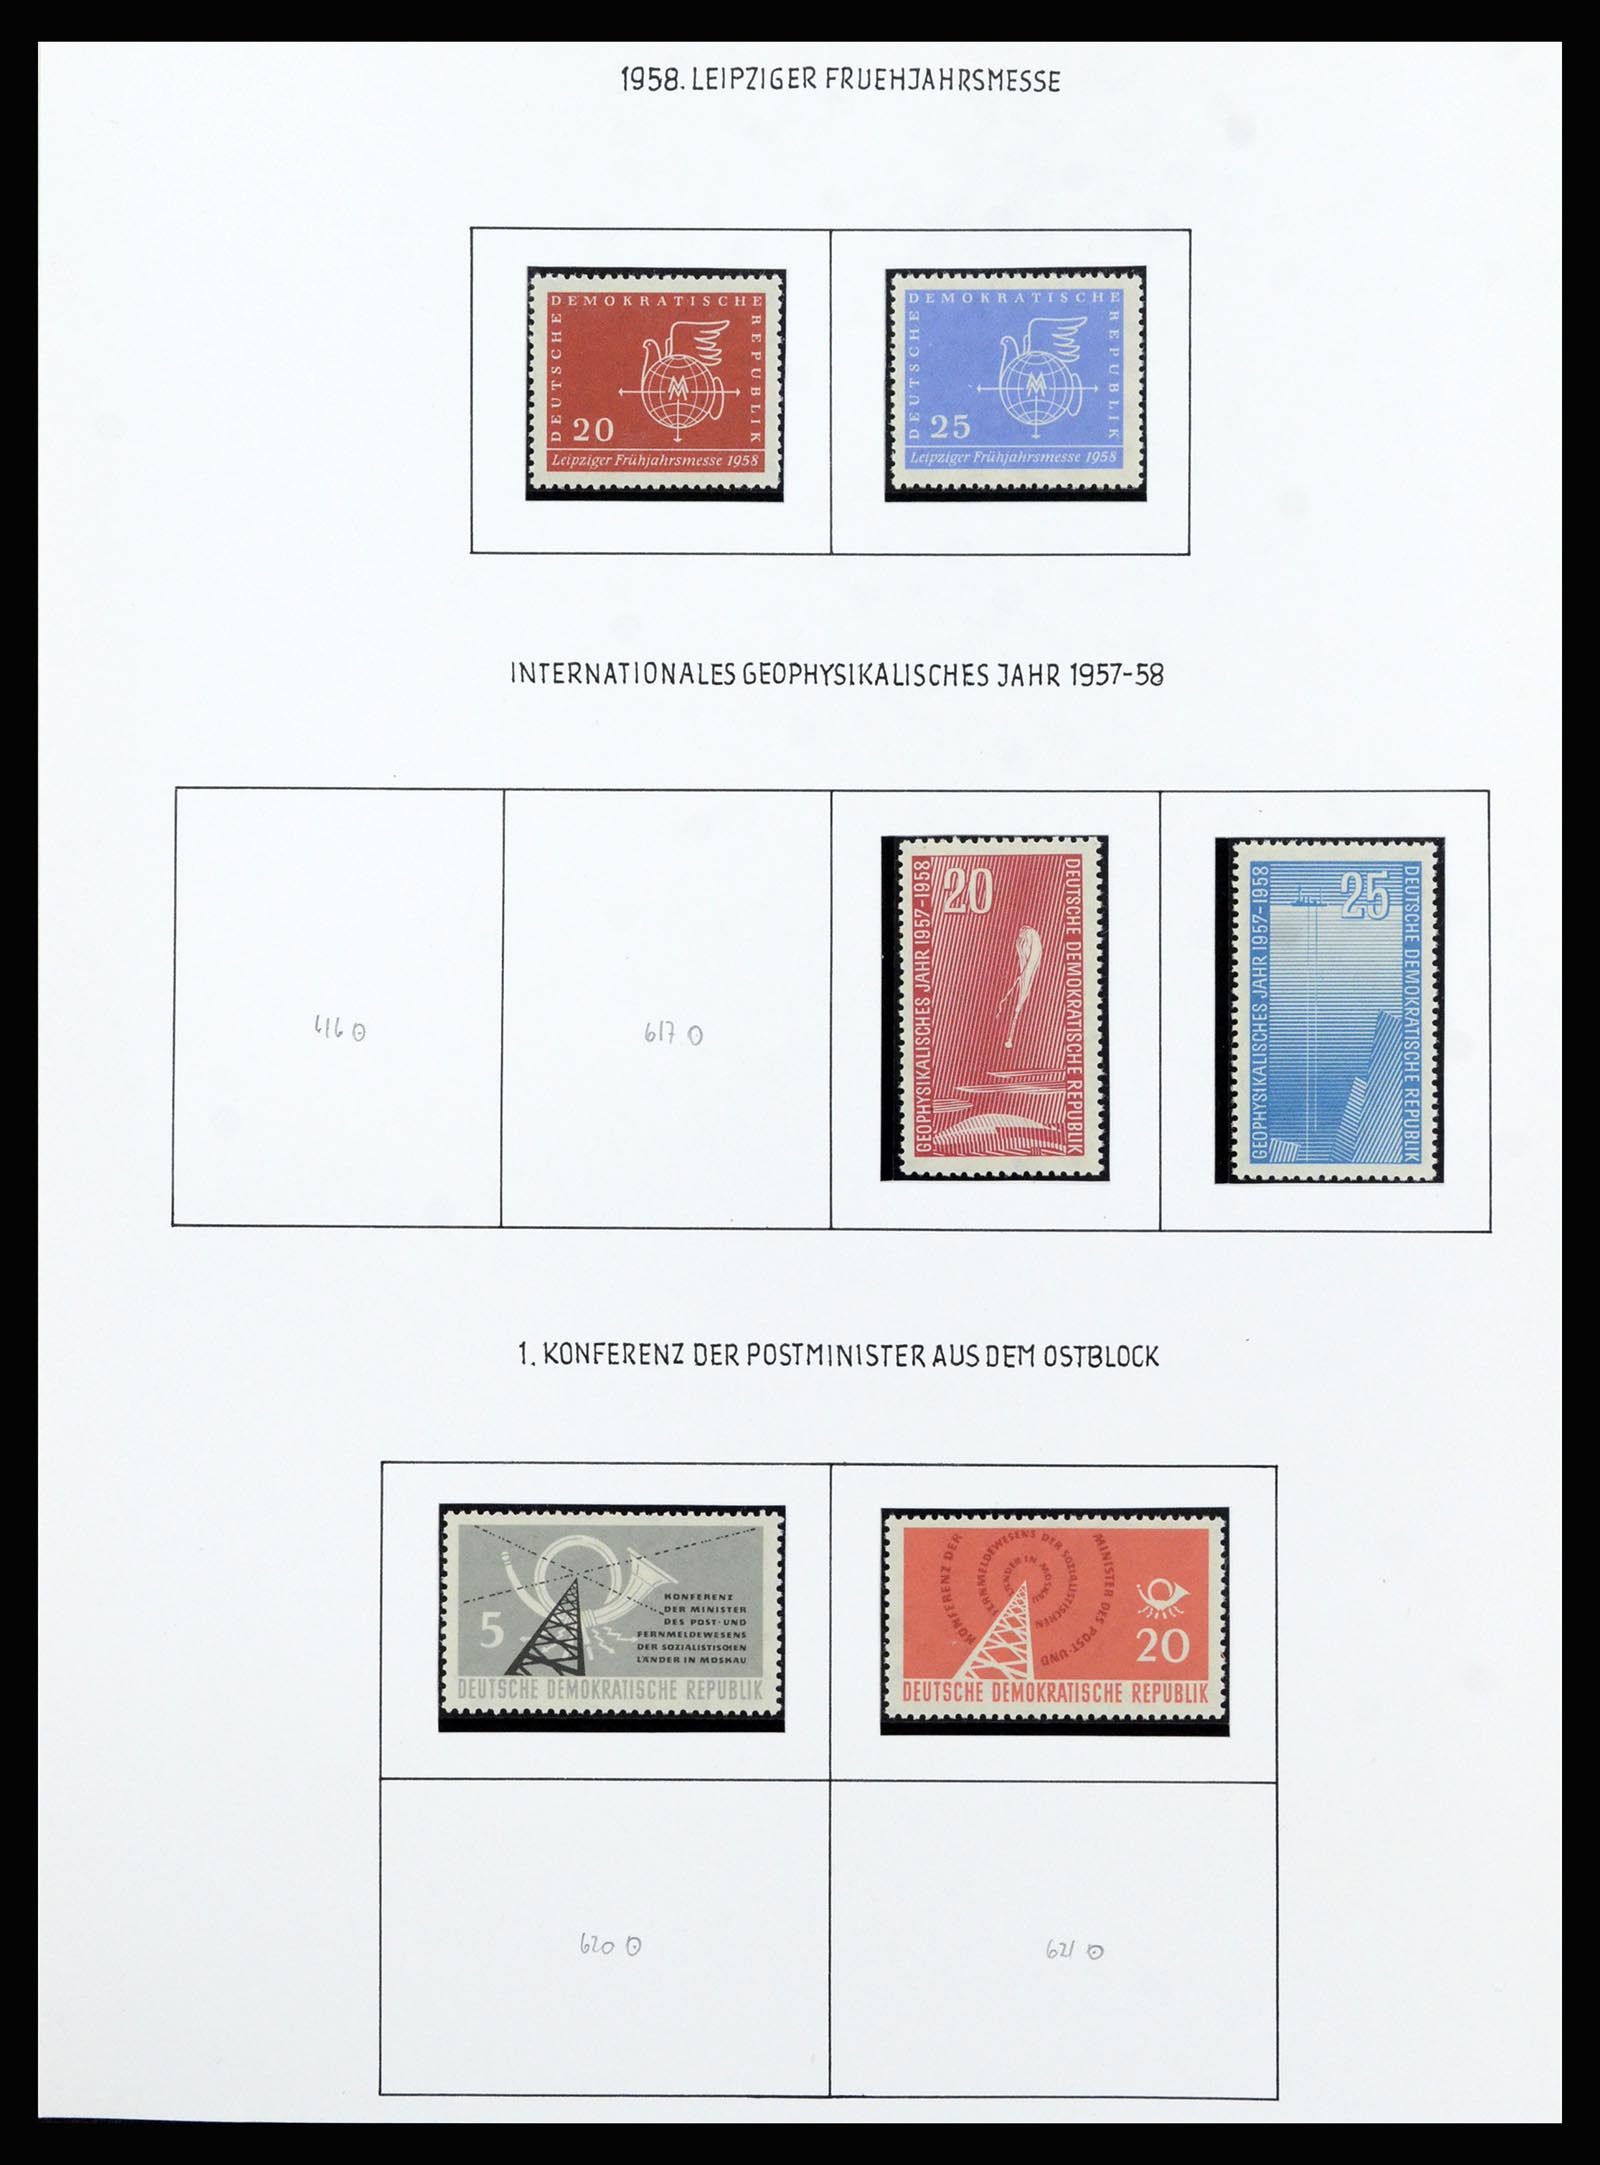 37101 055 - Stamp collection 37101 GDR 1954-1960.